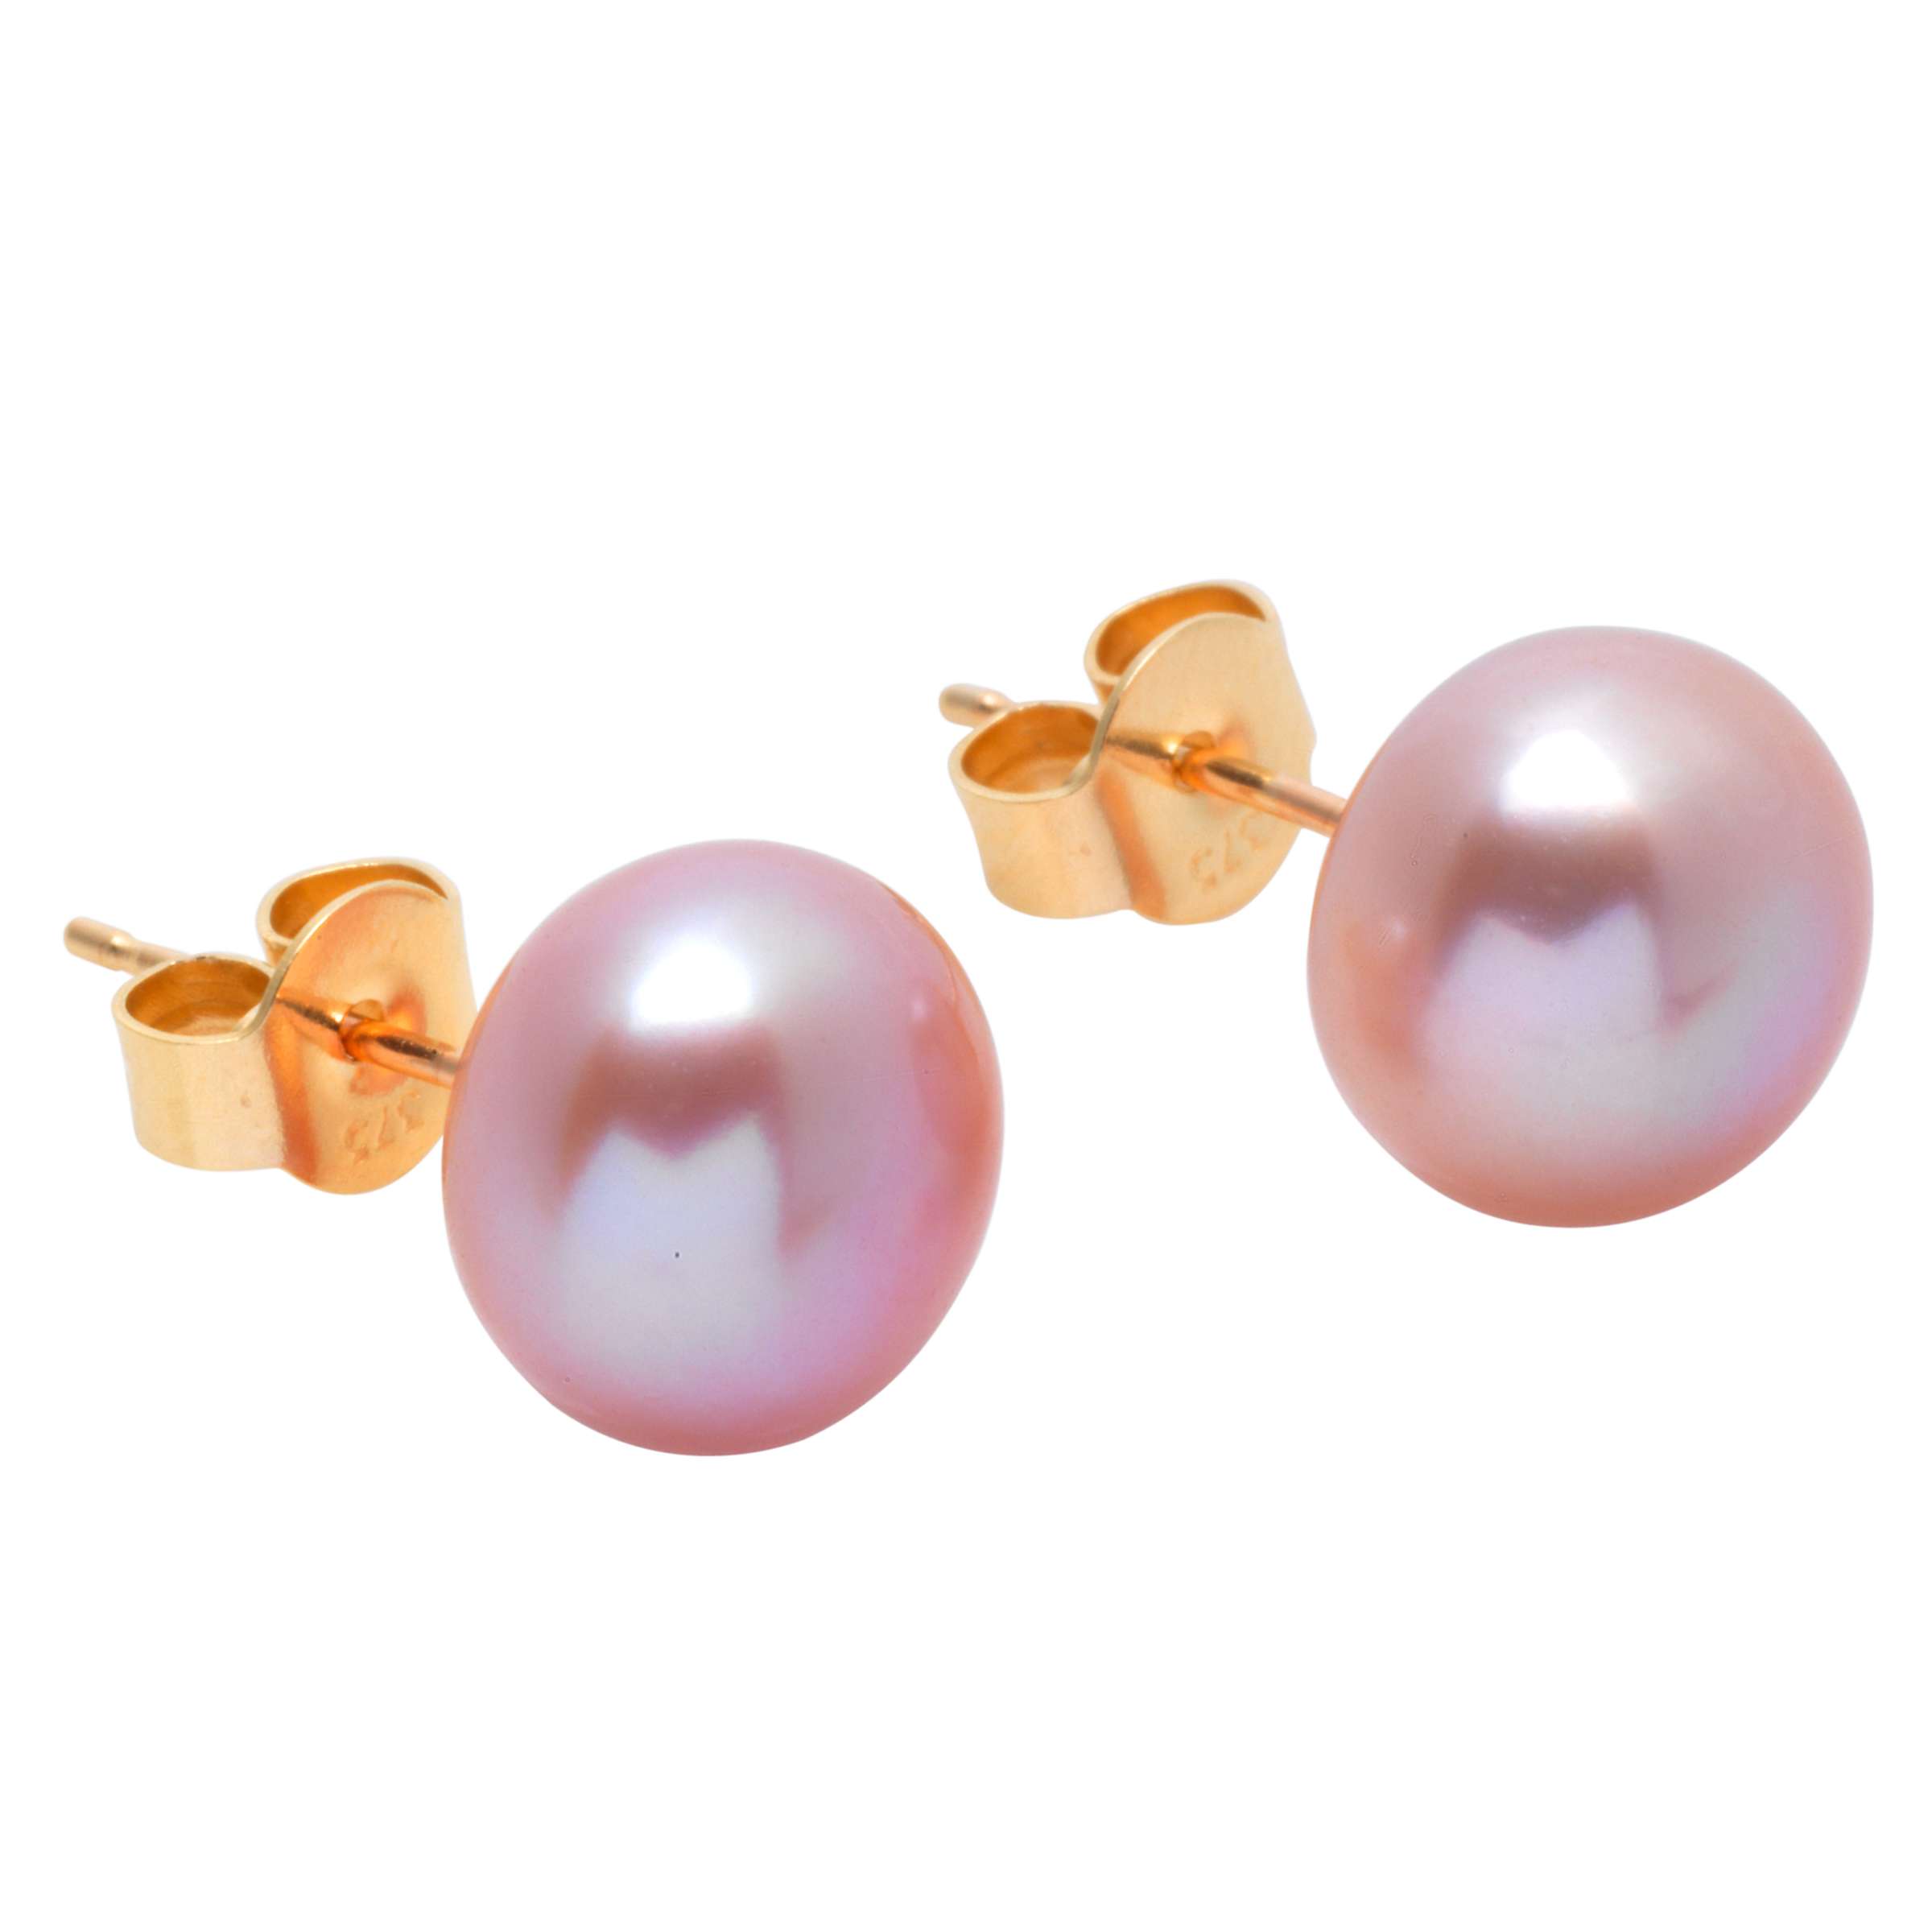 Buy A B Davis 9ct Yellow Gold Freshwater Pearl Bouton Stud Earrings Online at johnlewis.com